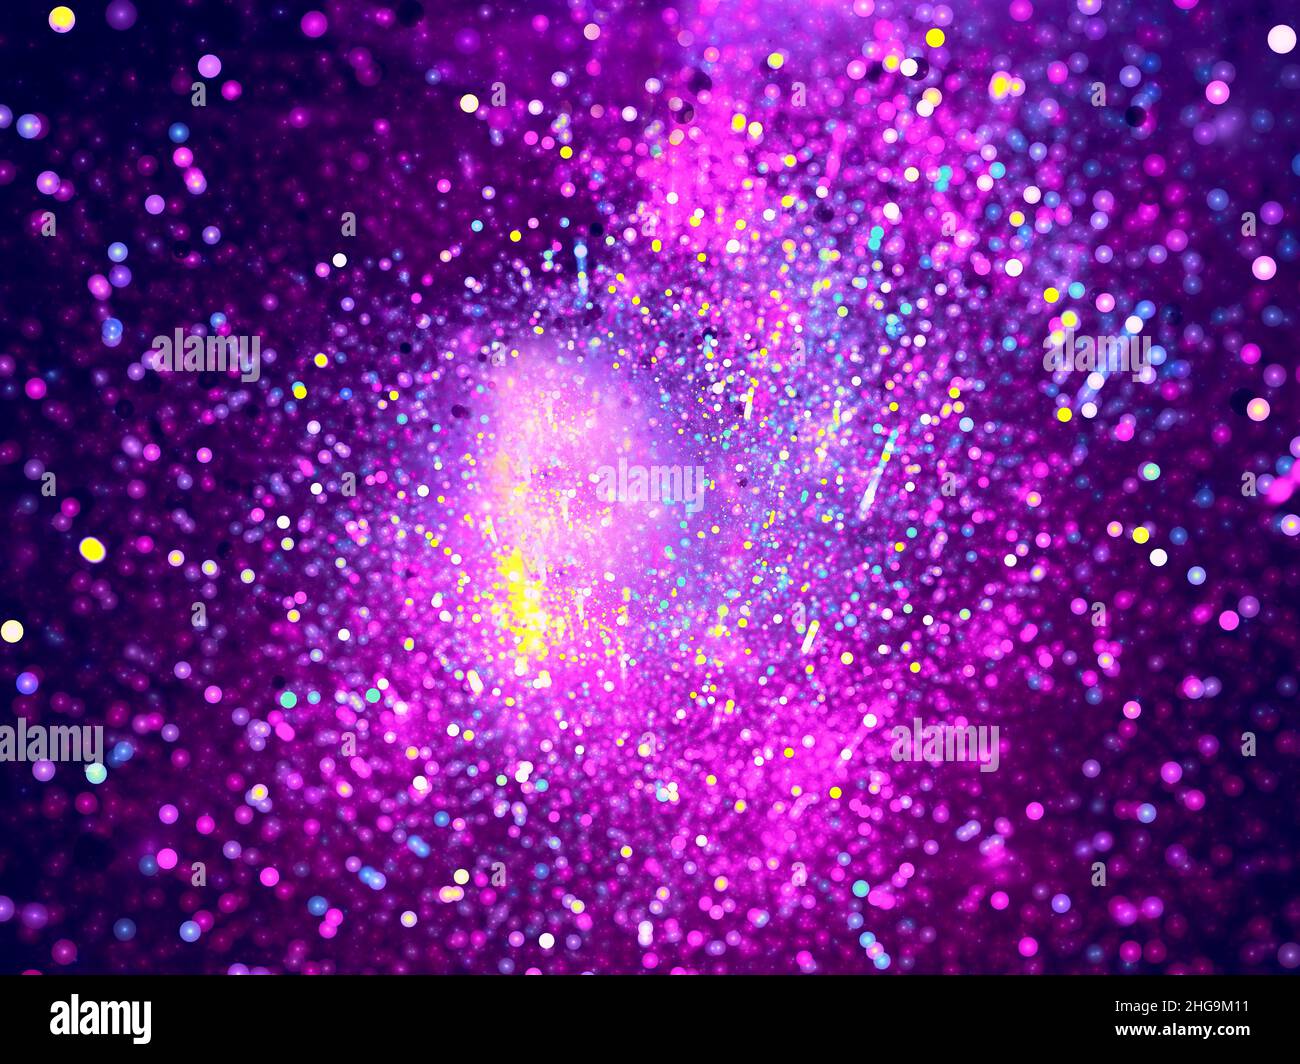 Purple blurred background with bokeh of small balls - abstract illustration Stock Photo